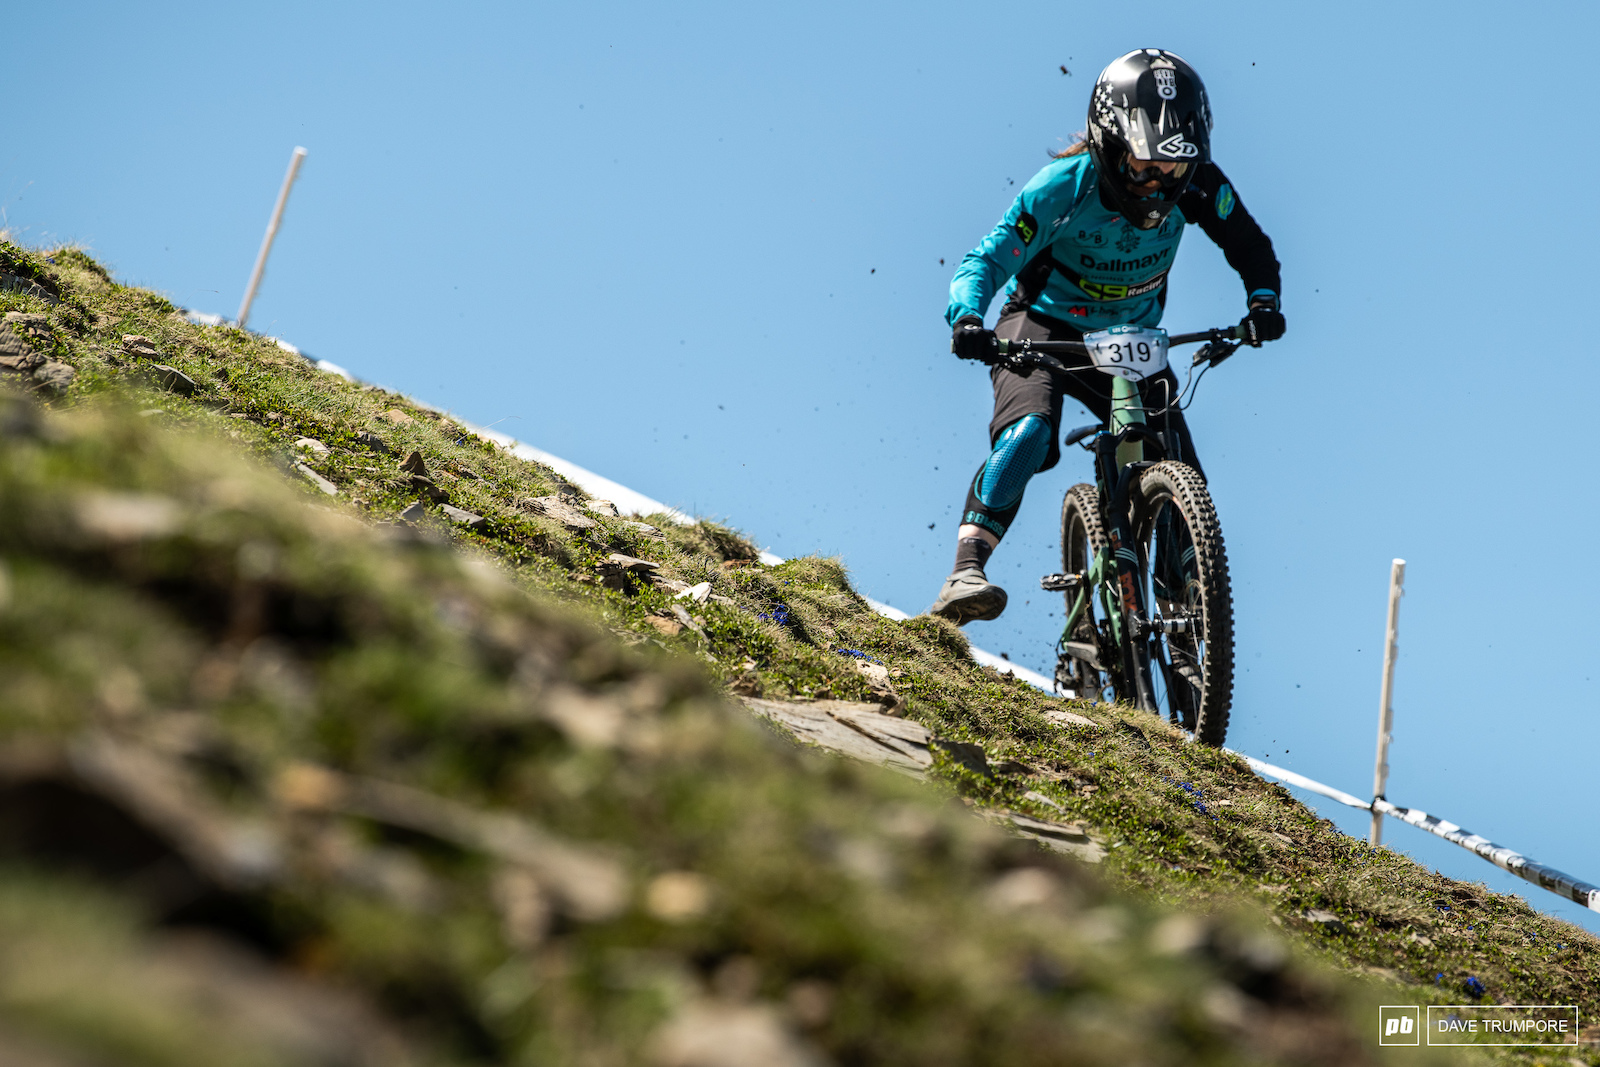 German Enduro Champ Raphaela Richter is having an amazing weekend and currently sits in 2nd at her first EWS since 2017.